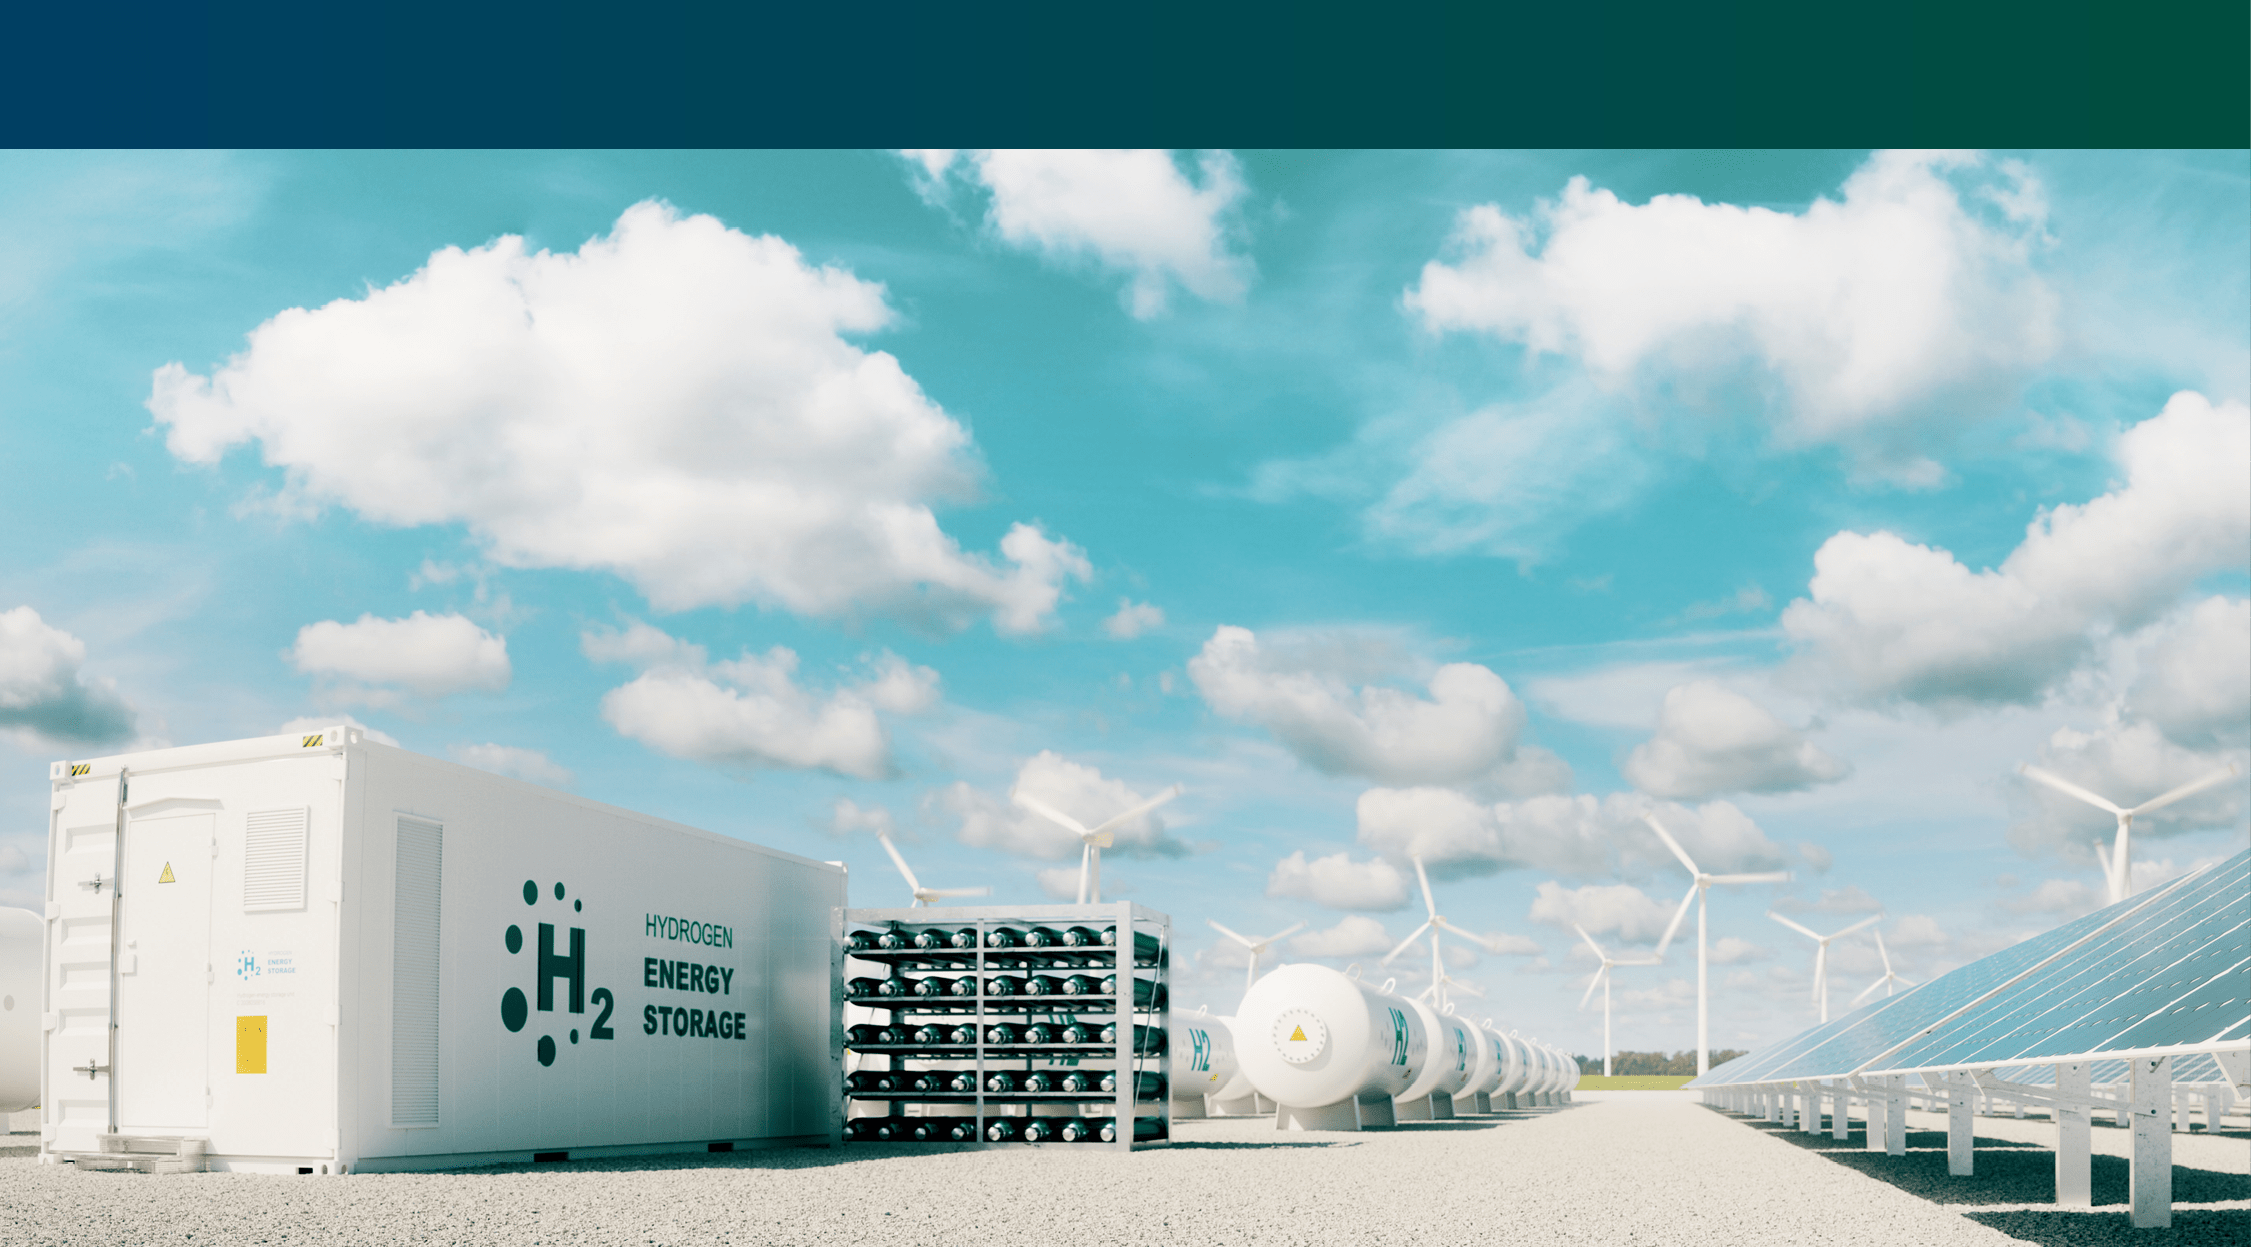 Modern hydrogen energy storage system accompaind by large solar power plant and wind turbine park in sunny summer afteroon light with blue sky and scattered clouds. 3d rendering.